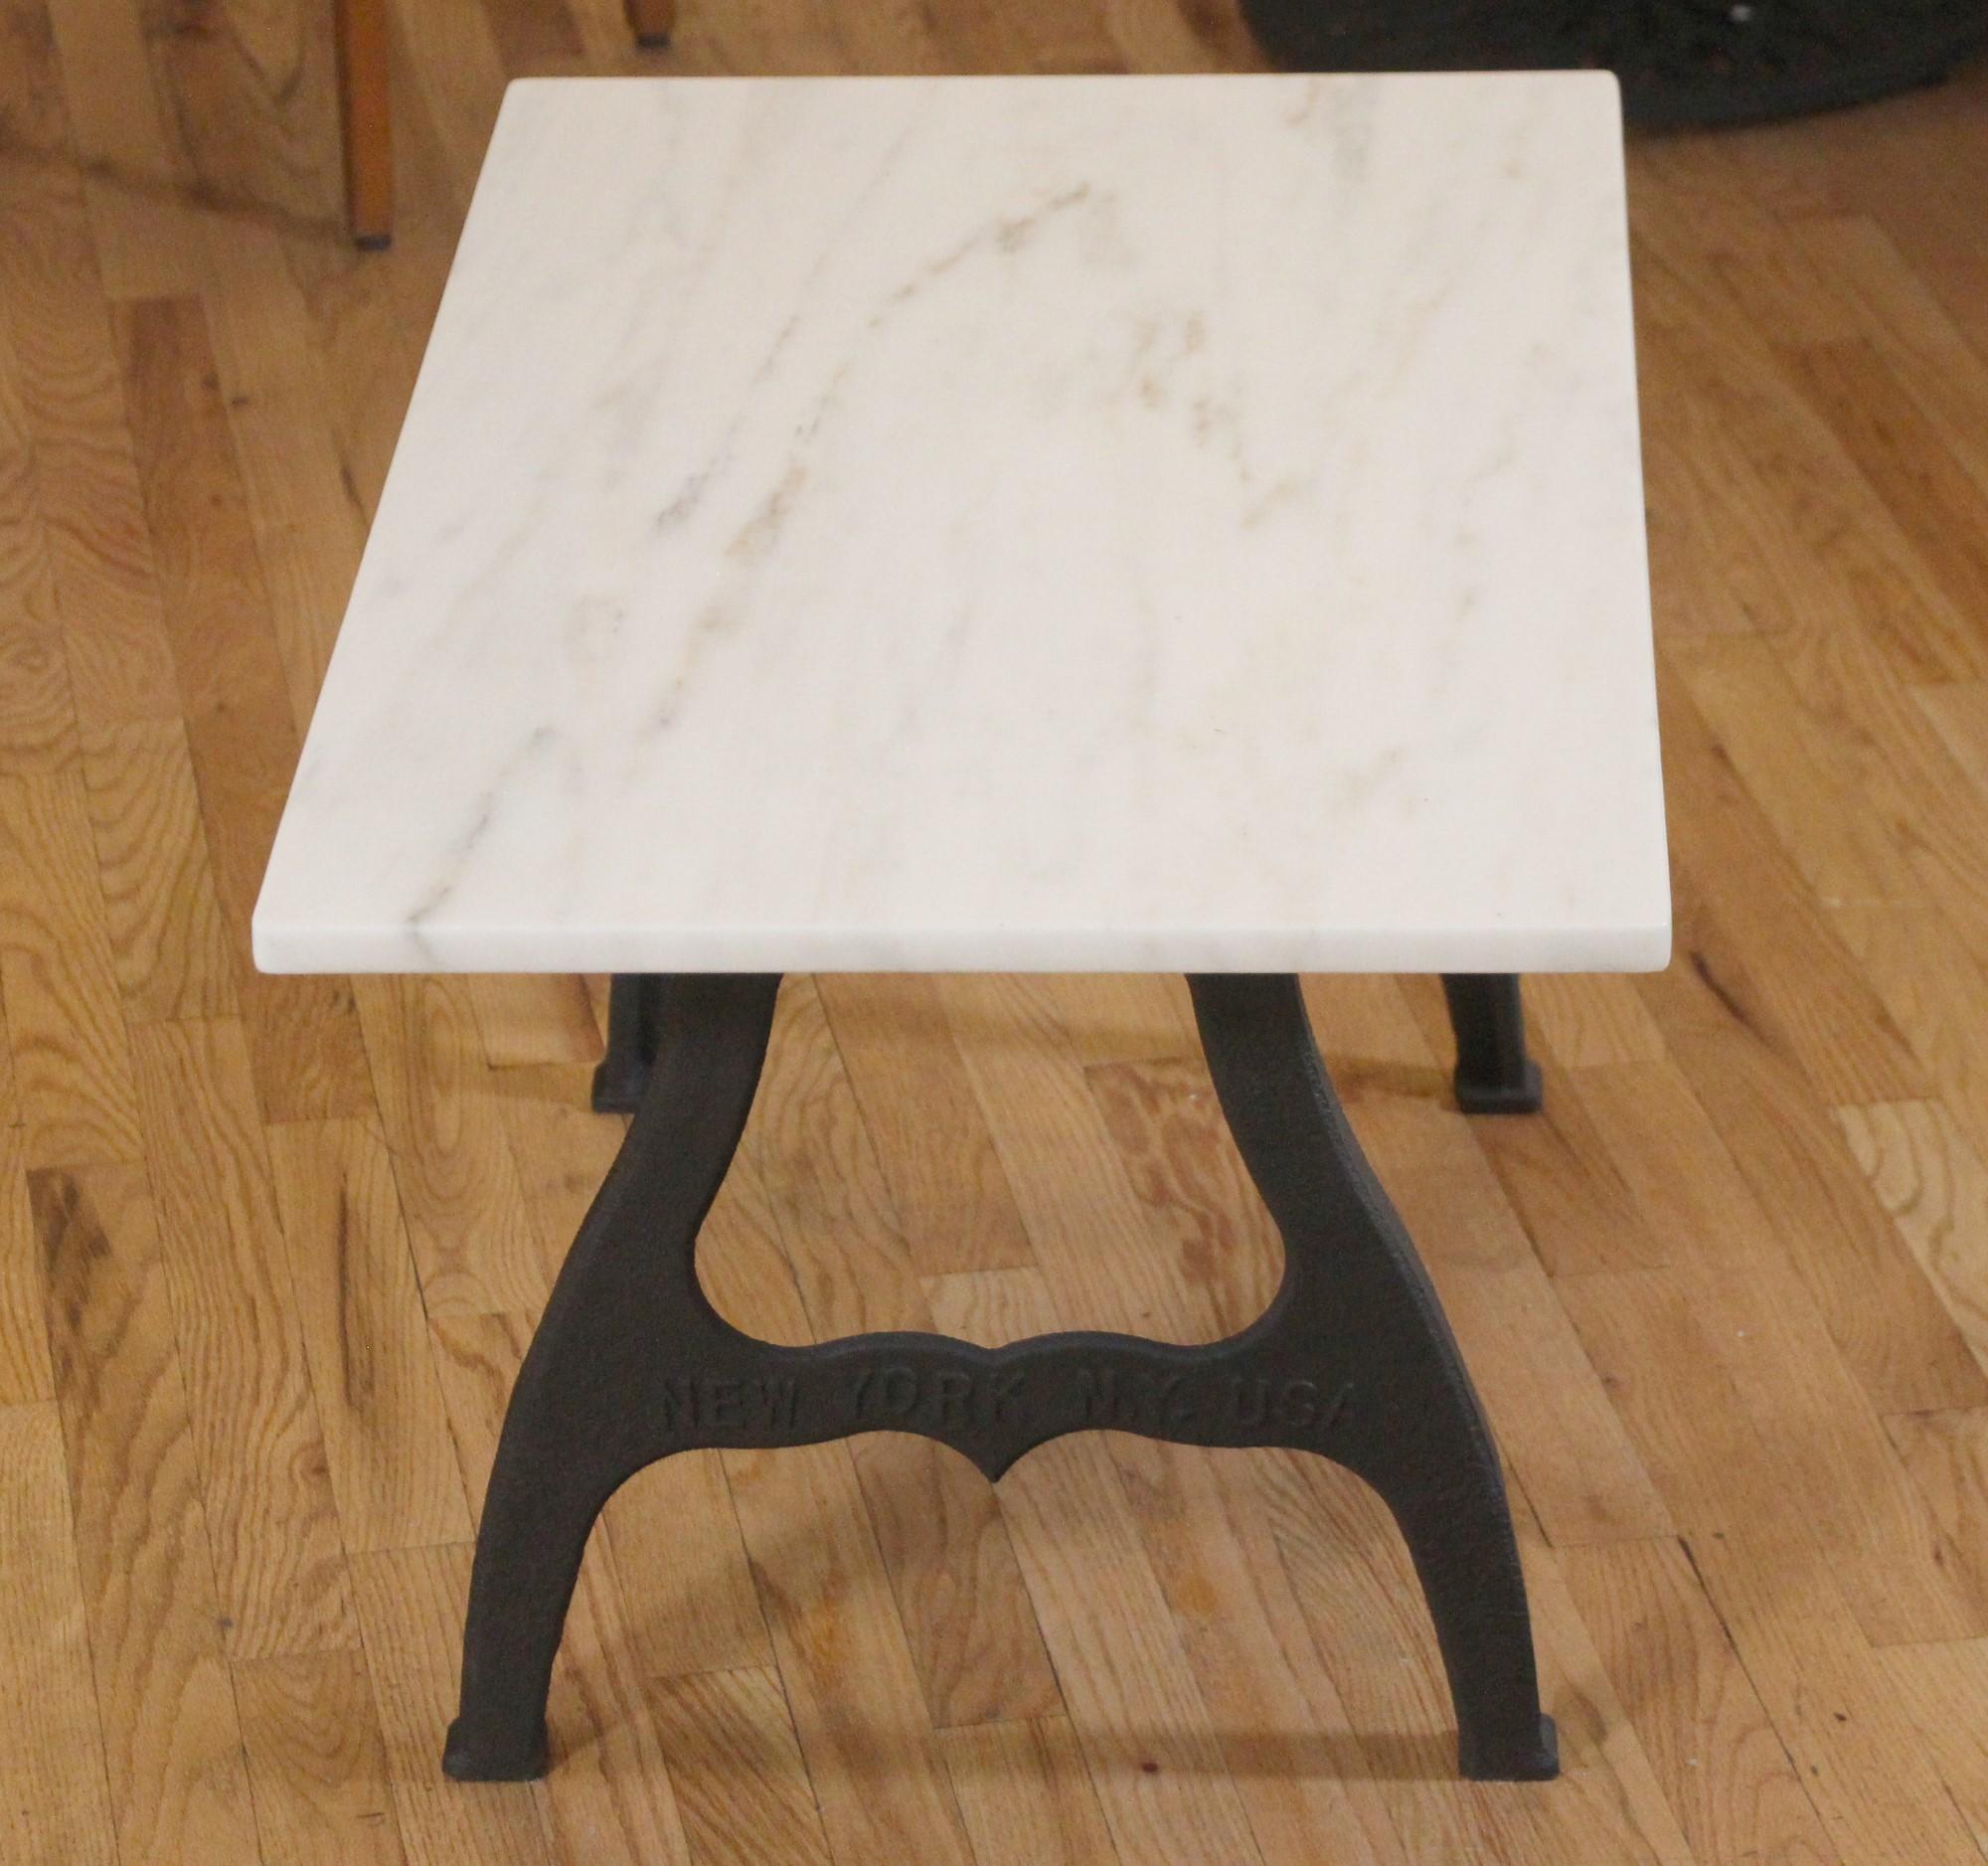 Contemporary Coffee Table w/ Cast Iron Industrial Legs White Marble + Gray Tan Veins